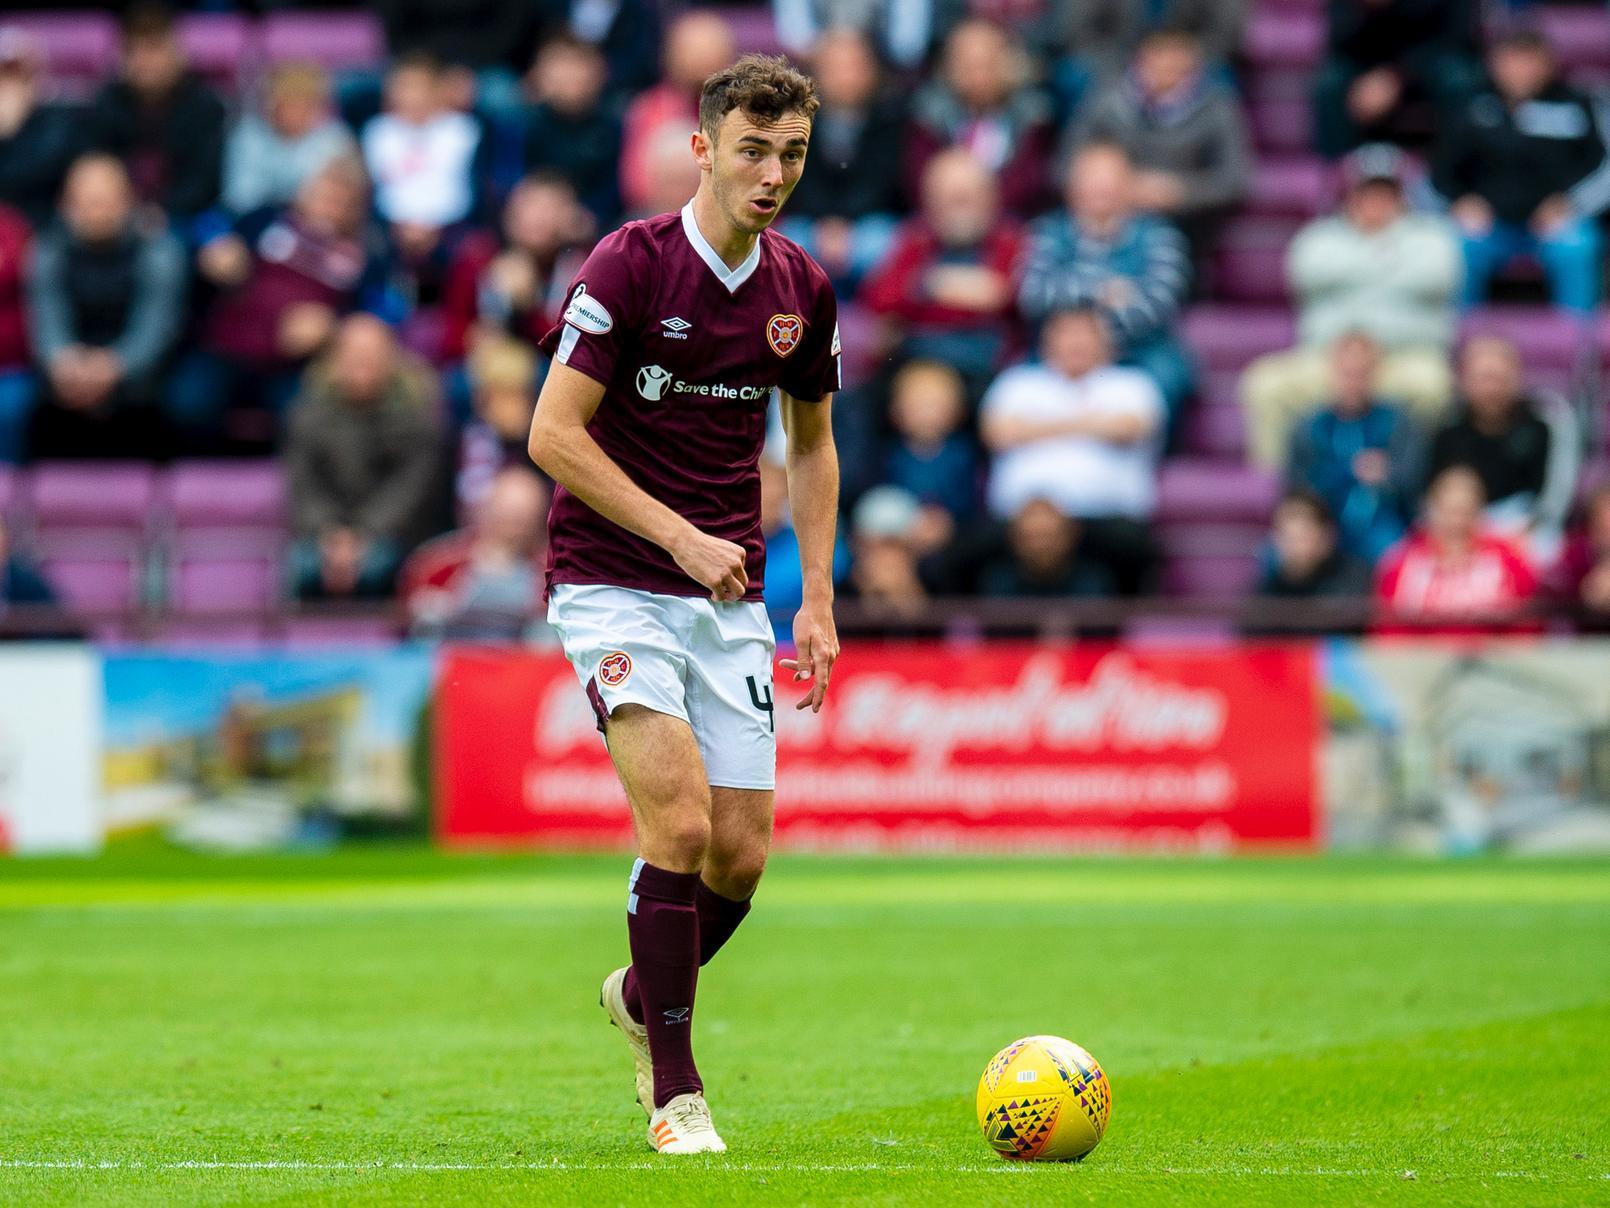 Played well in the first half as Hearts were on top. Another who blotted his copybook after half-time as his usual composure deserted him at times.